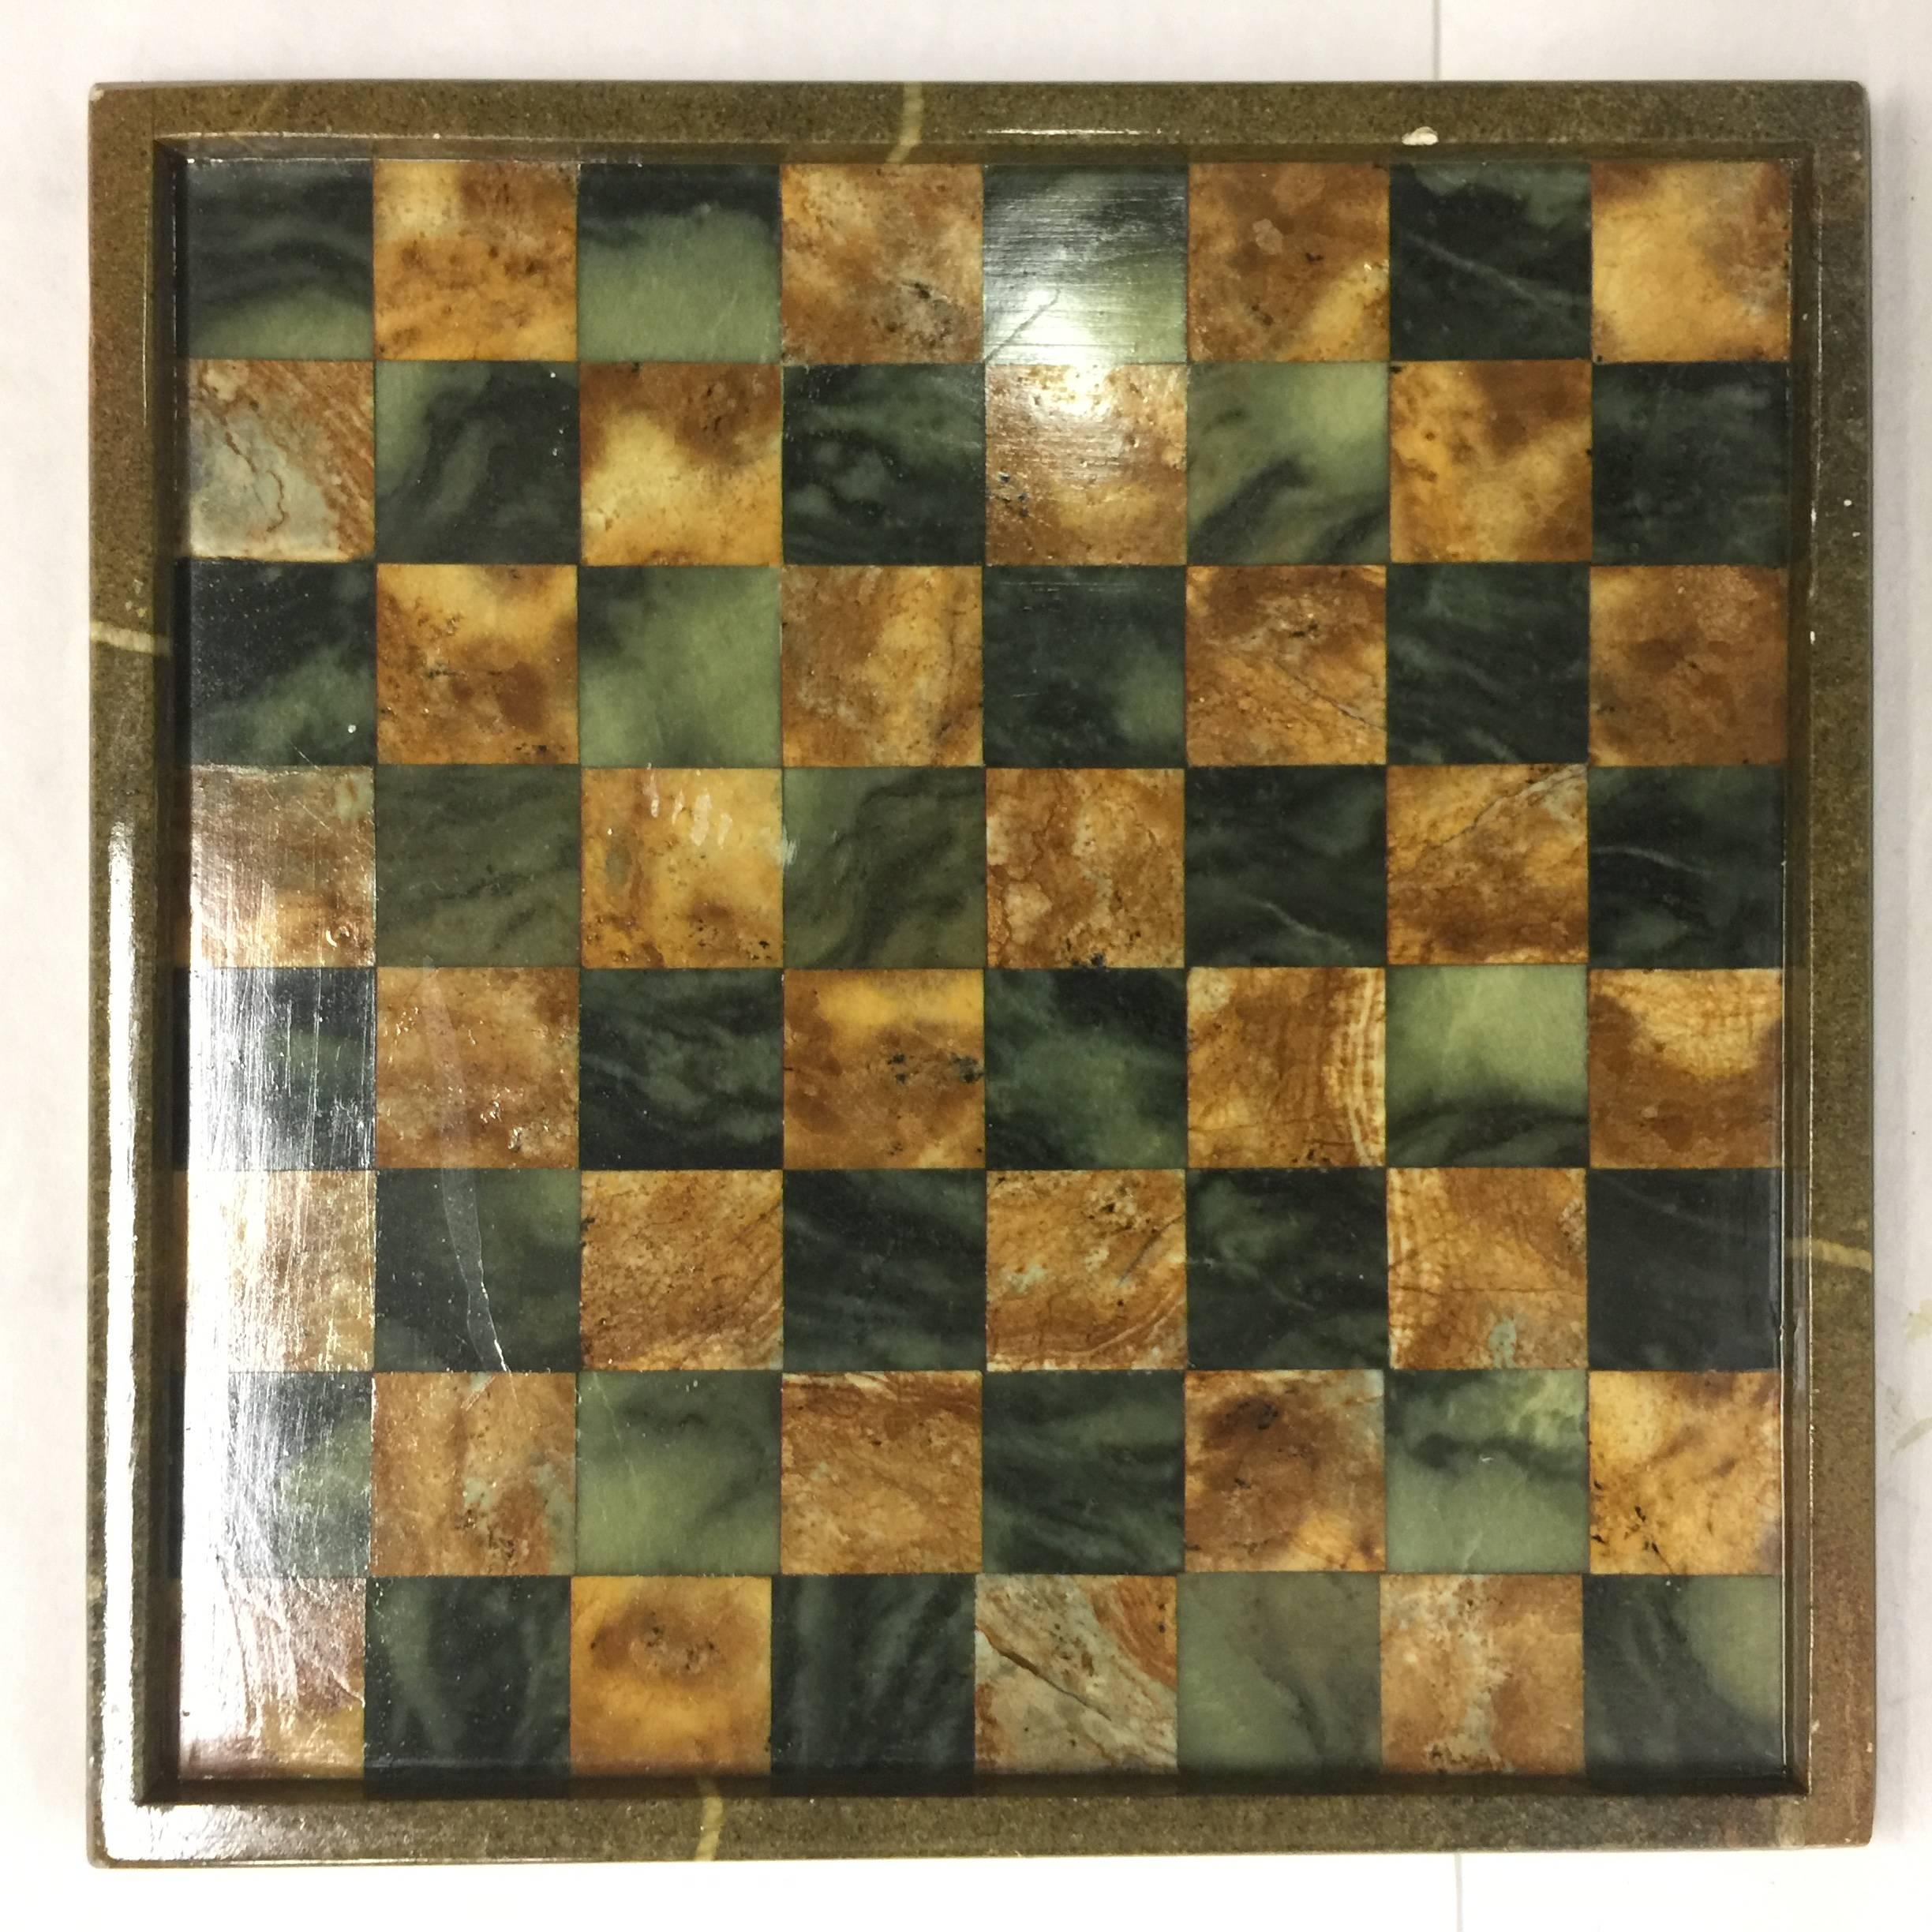 Game on! This vintage Brazilian chess or checkers game board is a mix of different marbles. Gorgeous!